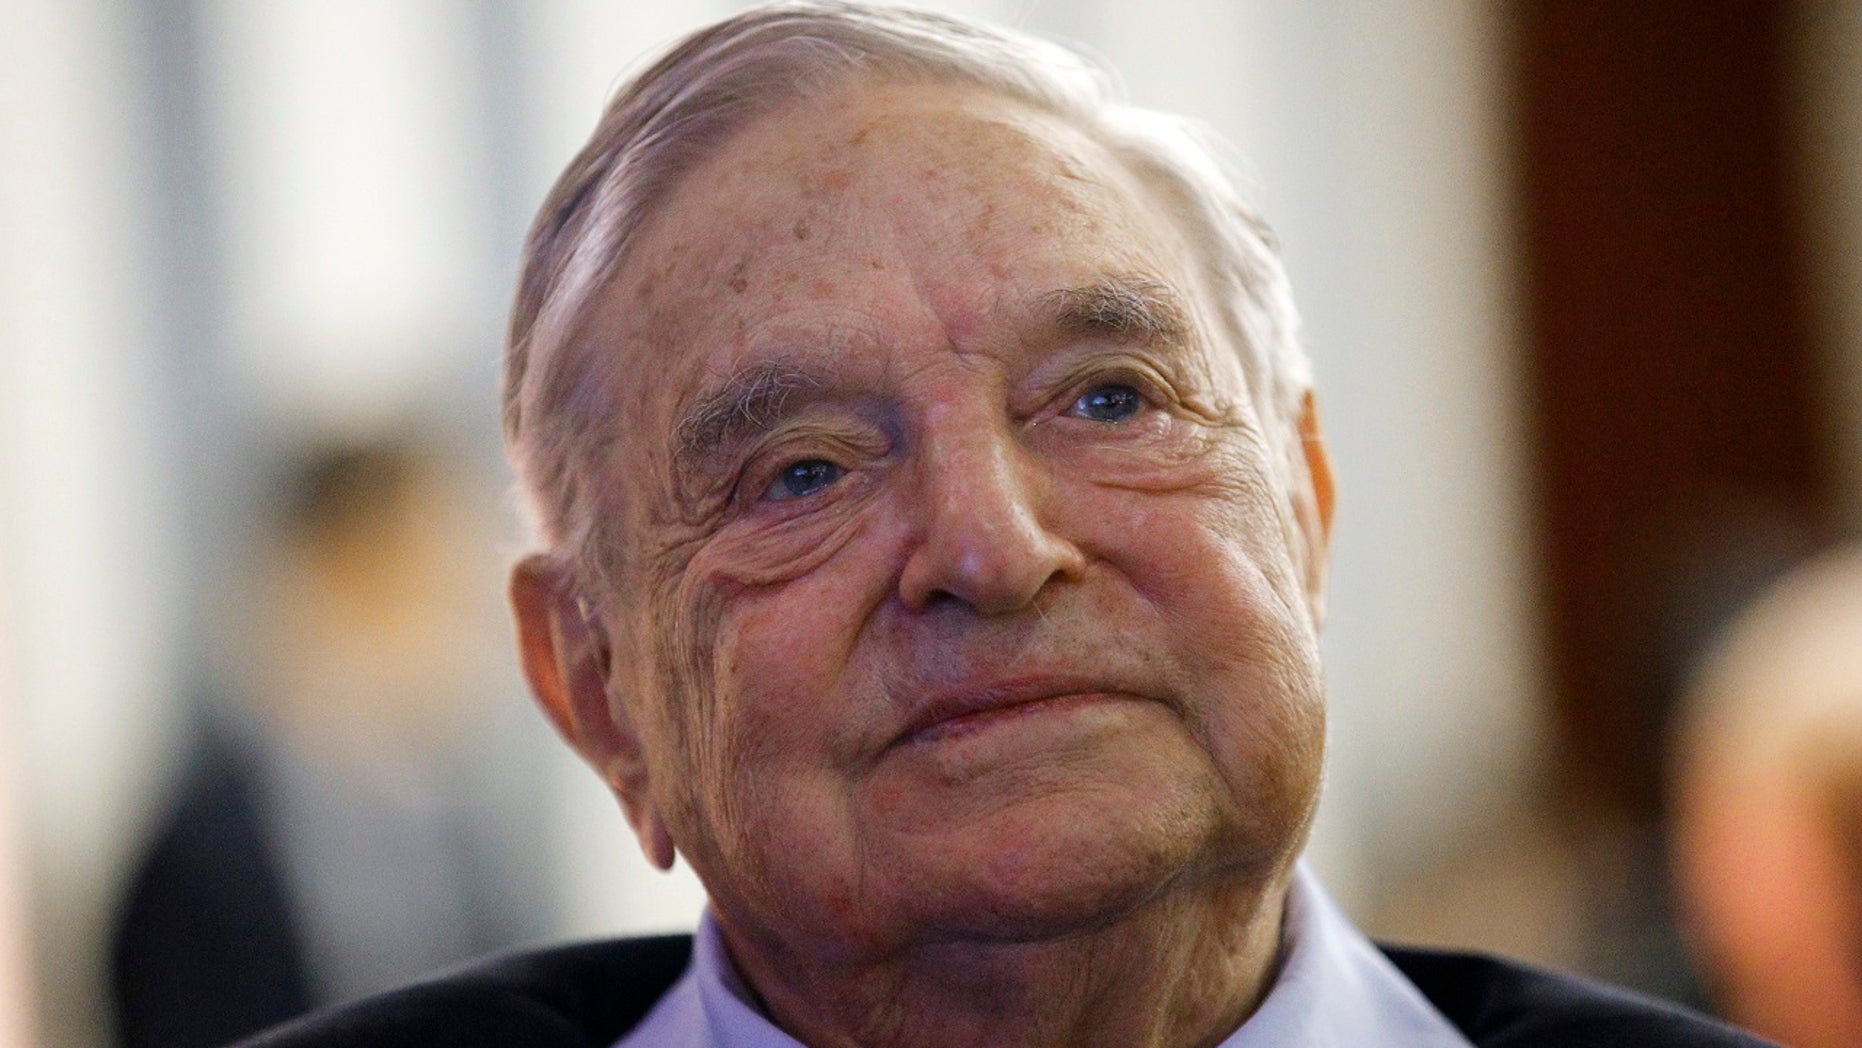 Explosive device found at Soros’ home report Fox News